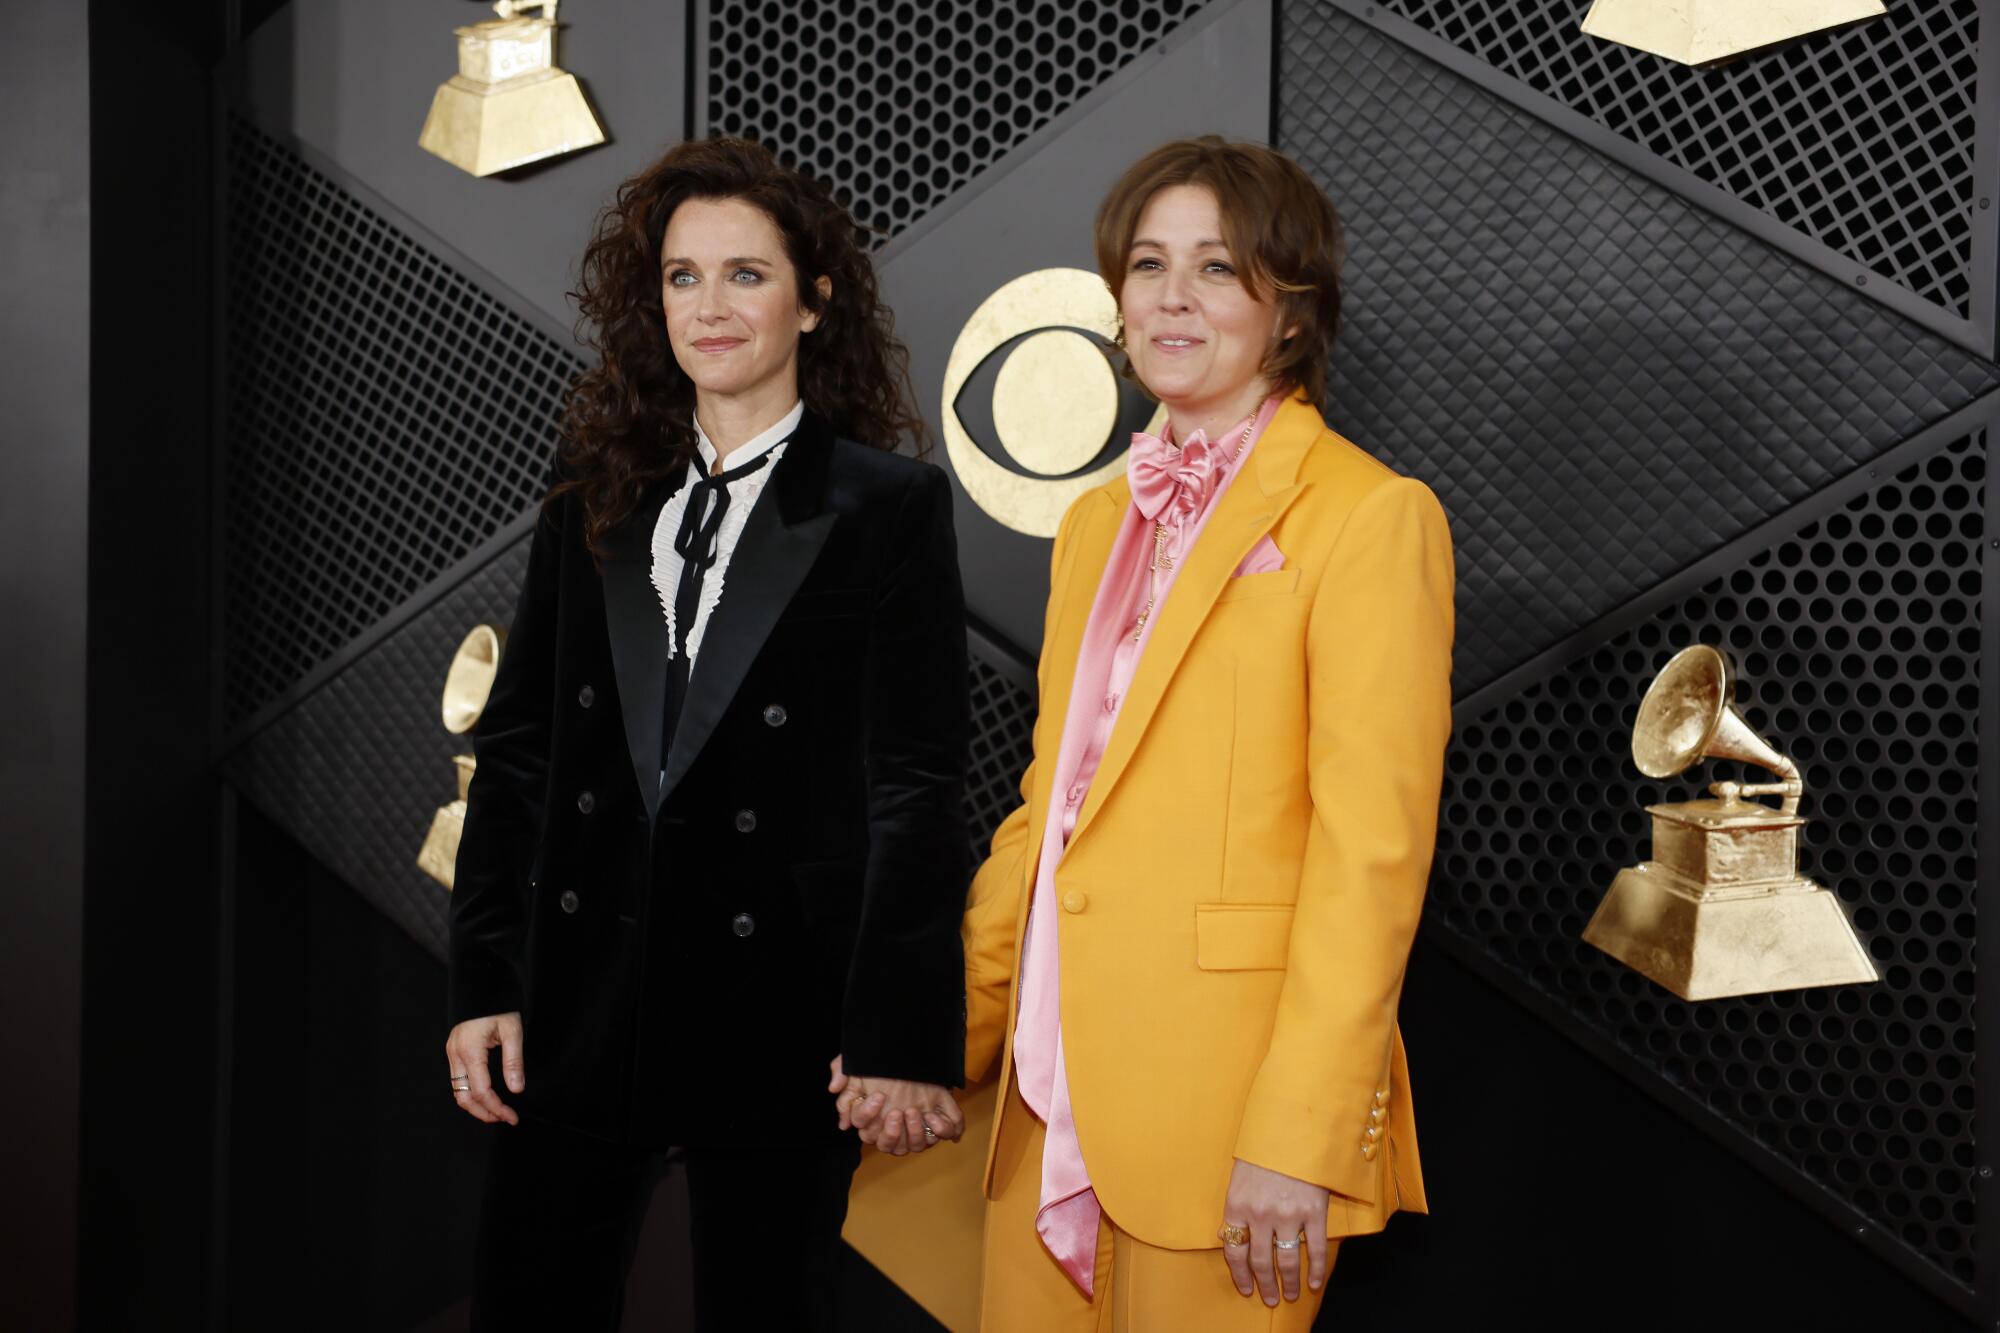 Catherine Shepherd in a black suit holds hands with Brandi Carlile in a yellow suit